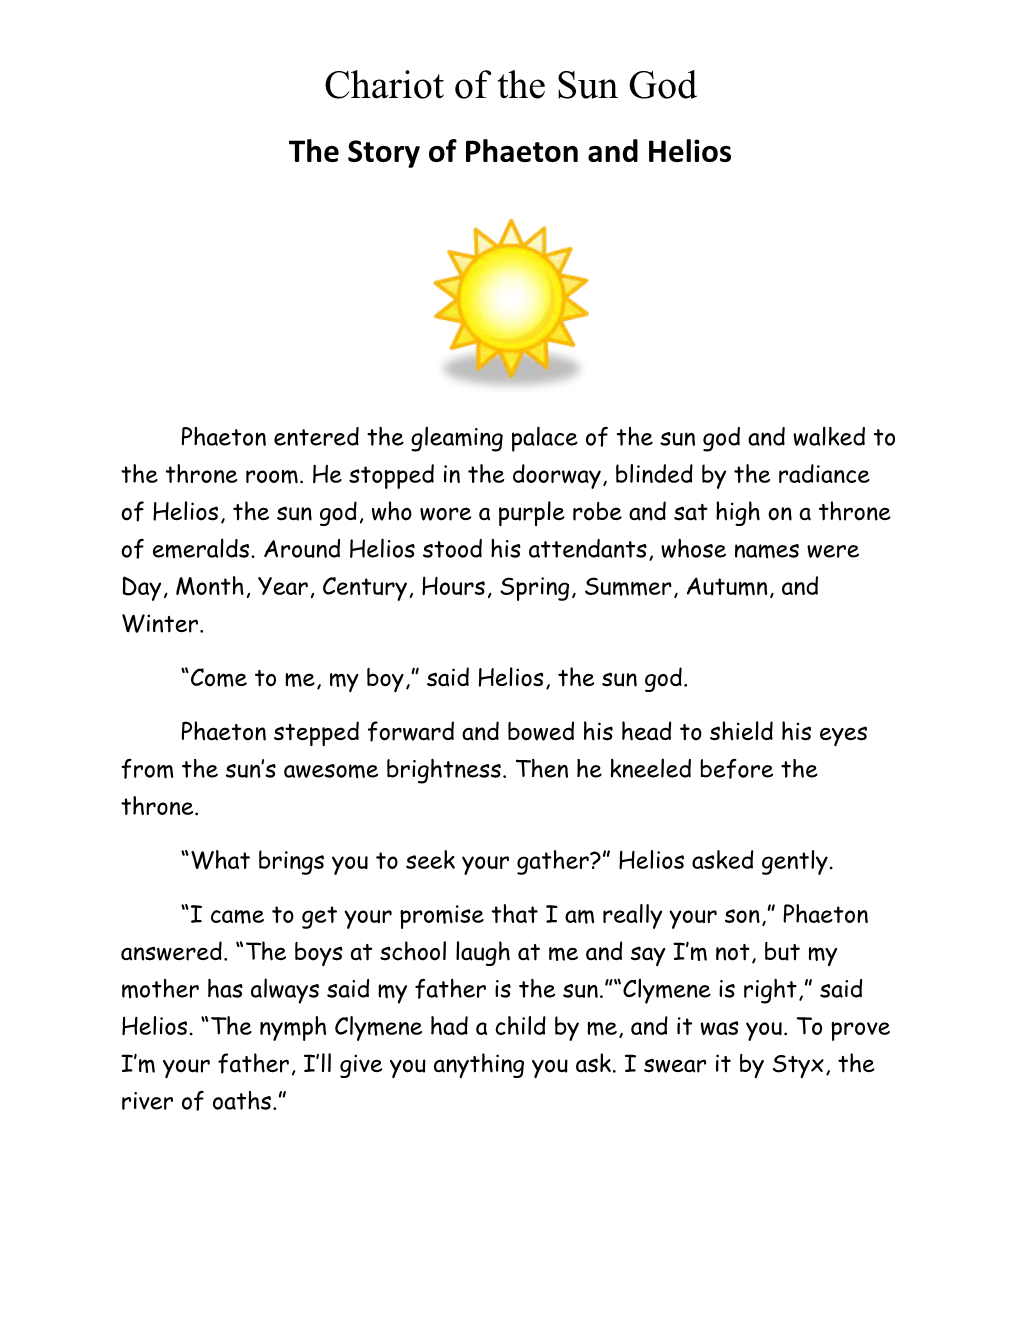 The Story of Phaeton and Helios